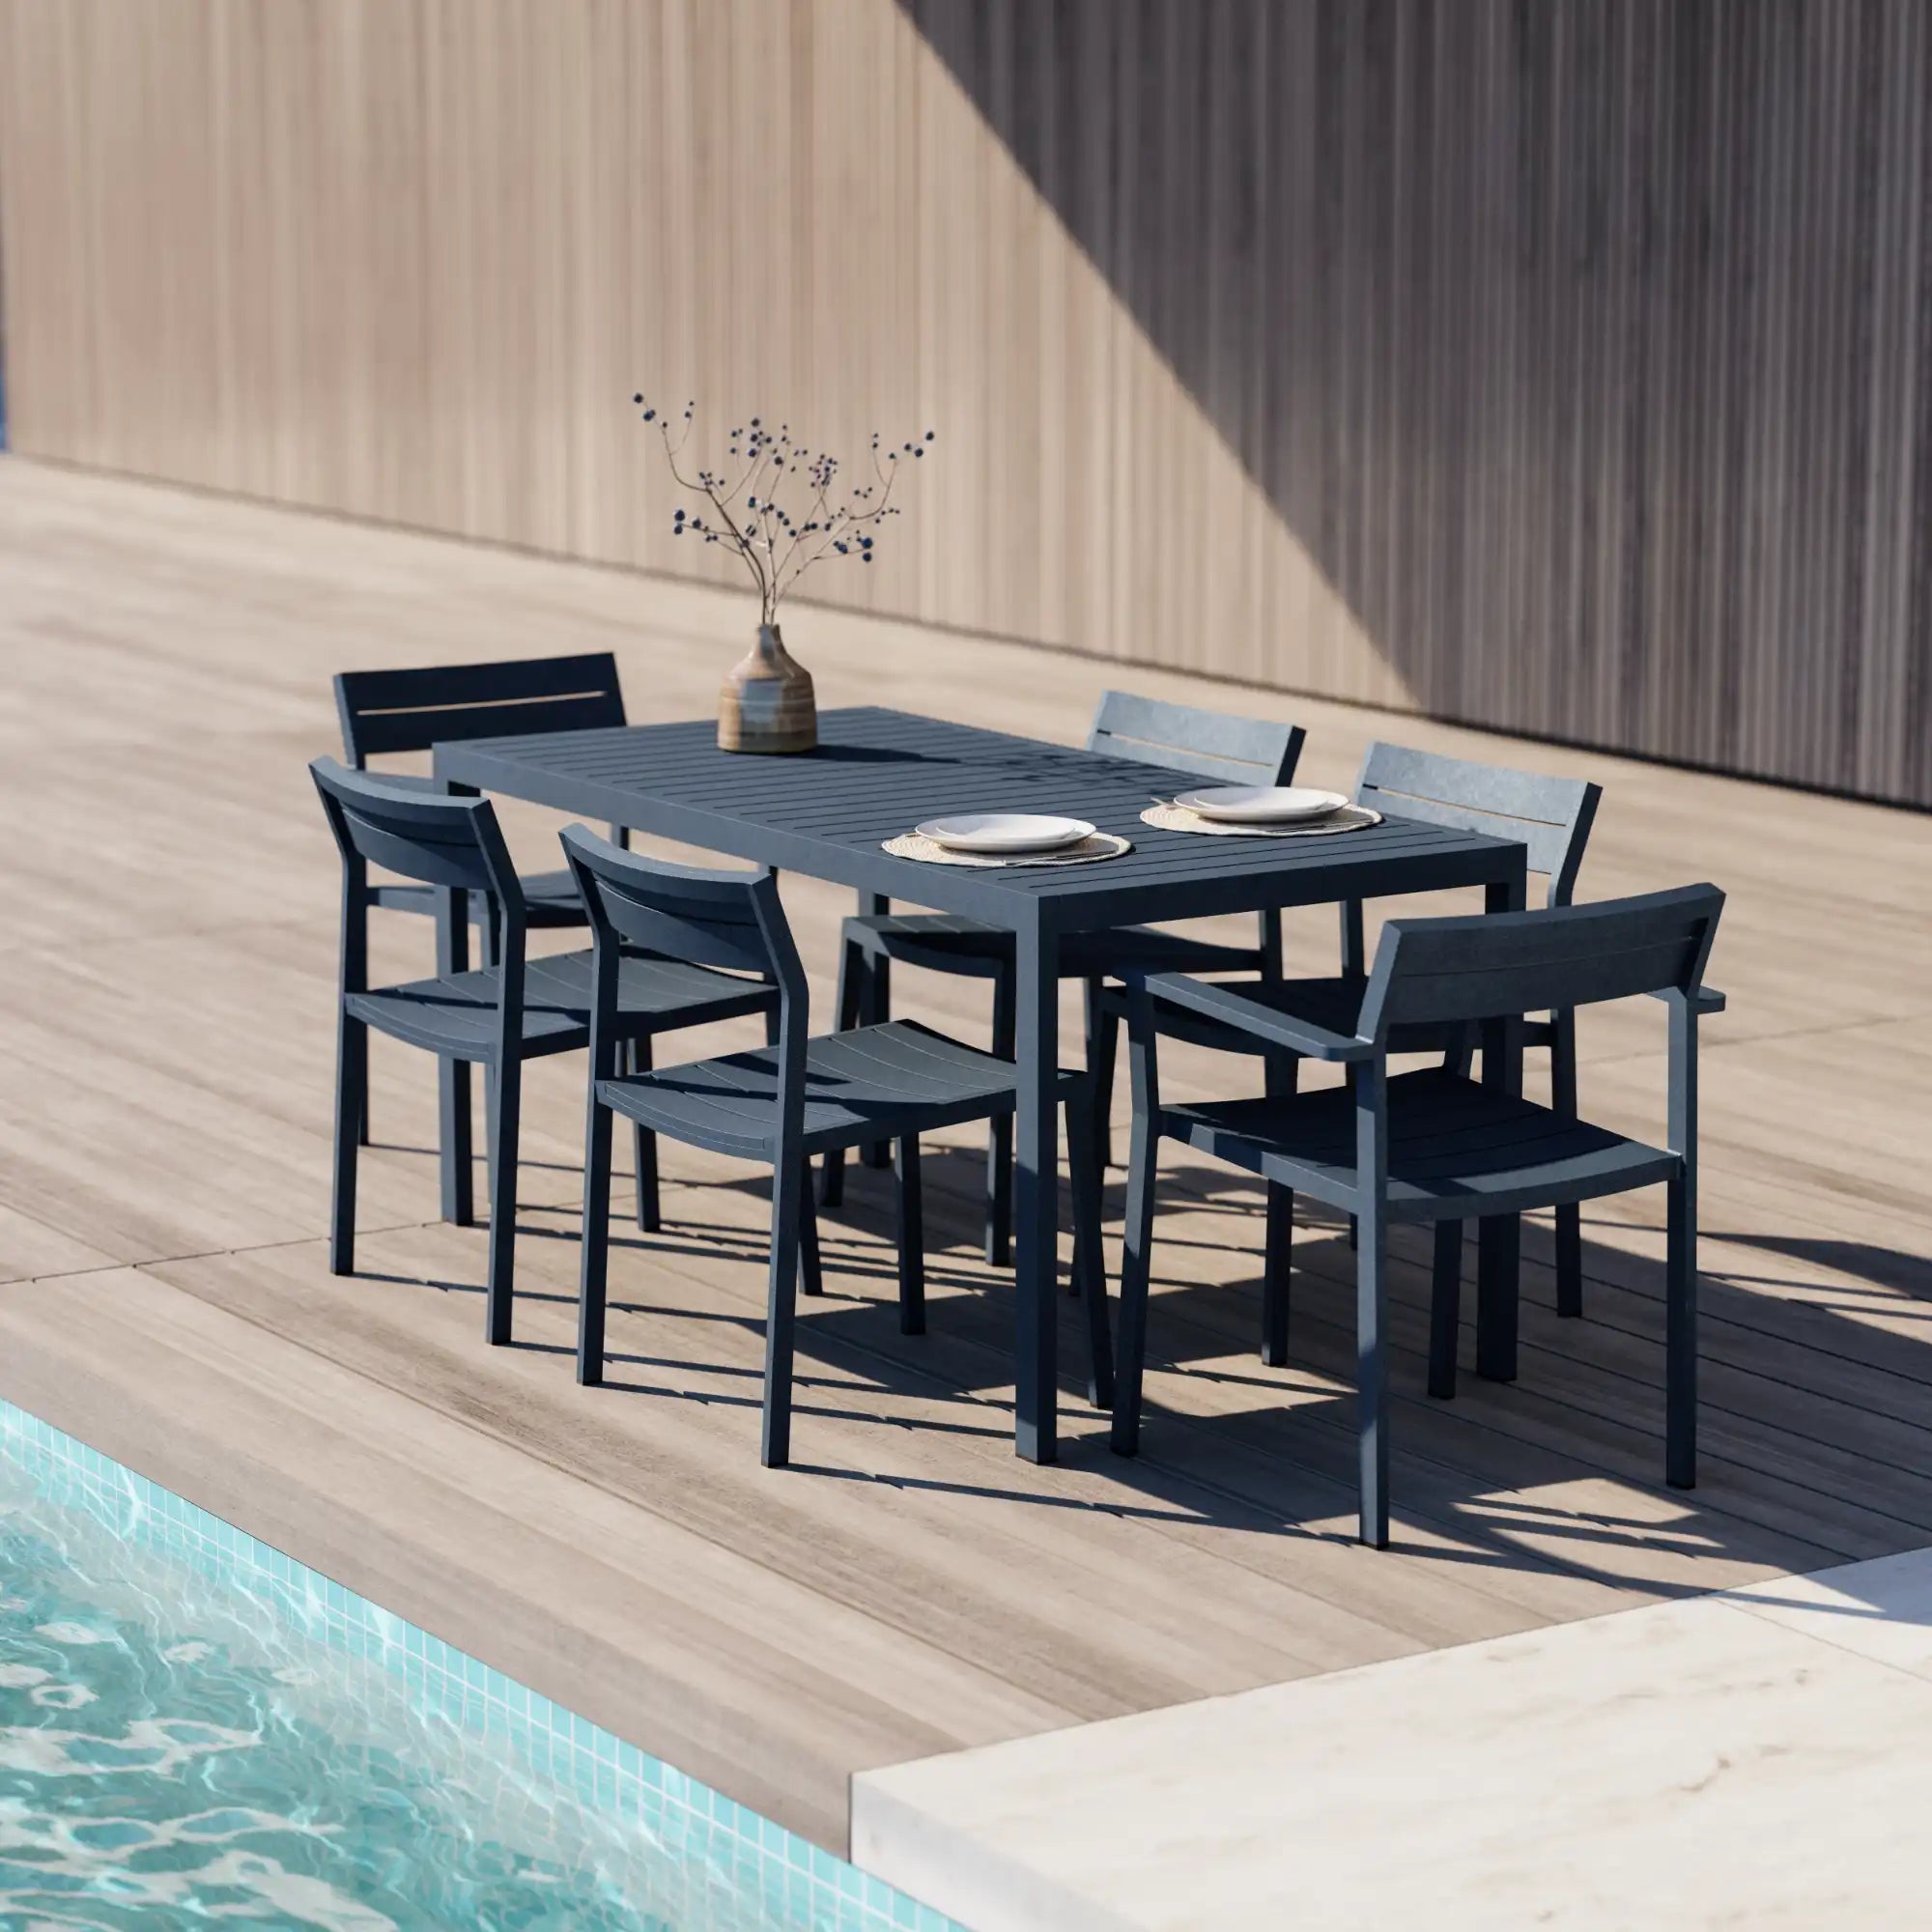 Eos Rectangular Table - THAT COOL LIVING